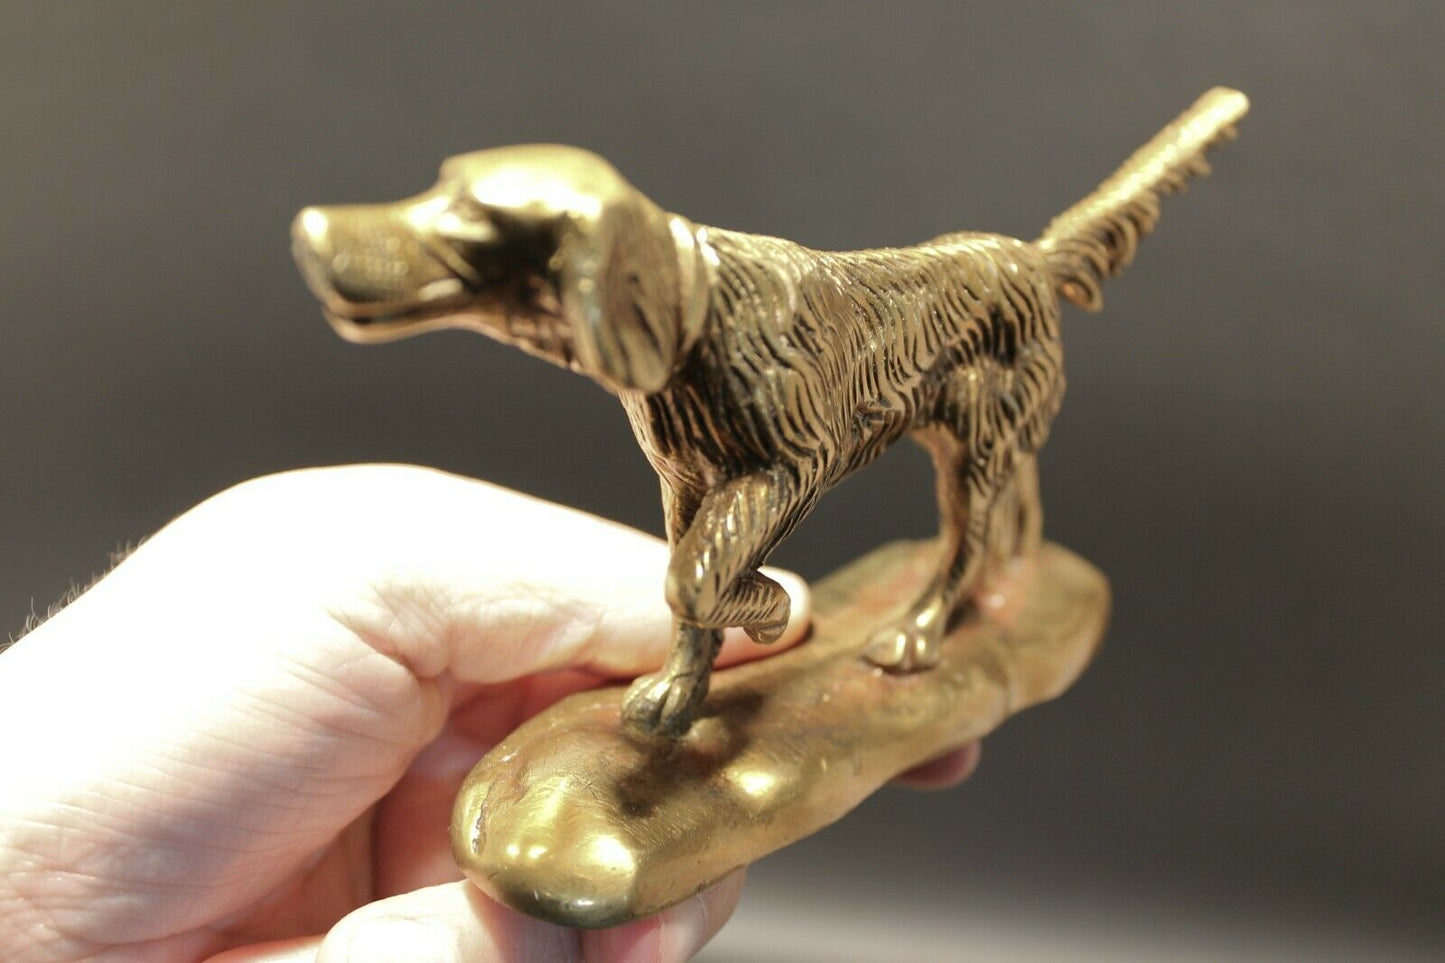 Vintage Antique Style Brass Pointer Hunting Dog Paperweight Desk Statue - Early Home Decor